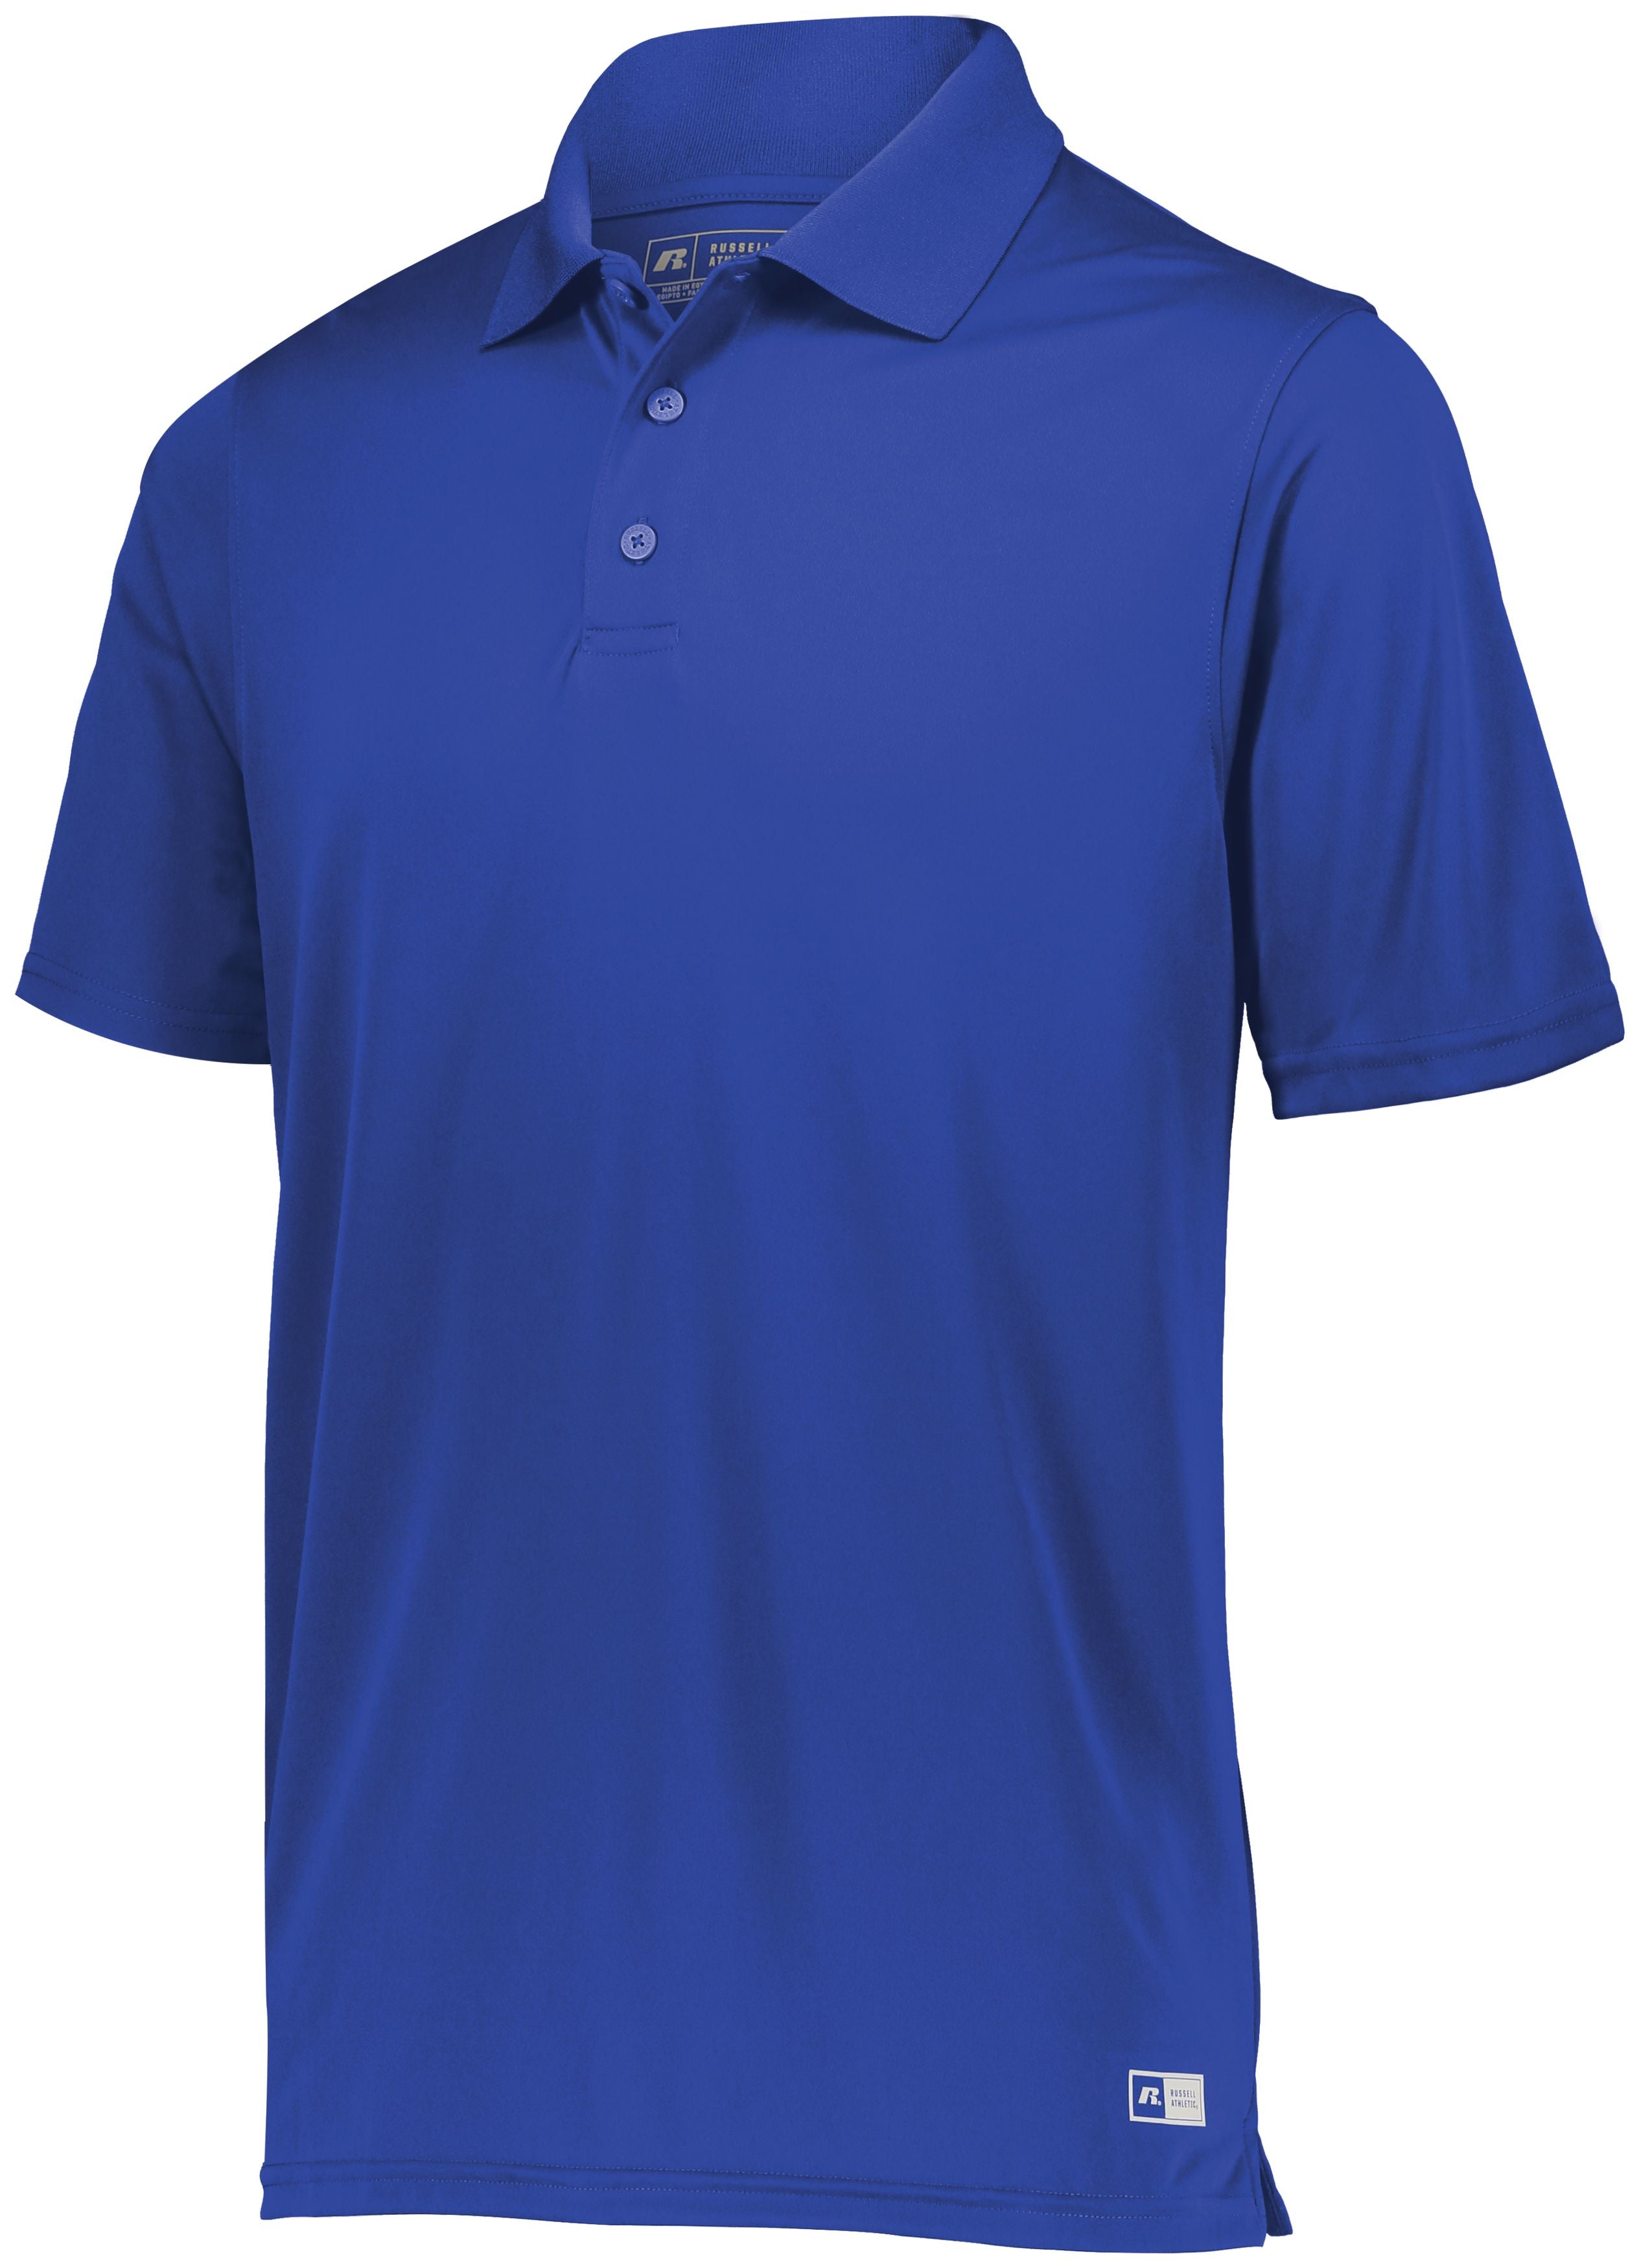 Russell Athletic Essential Polo in Royal  -Part of the Adult, Adult-Polos, Polos, Russell-Athletic-Products, Shirts, Corporate-Collection product lines at KanaleyCreations.com